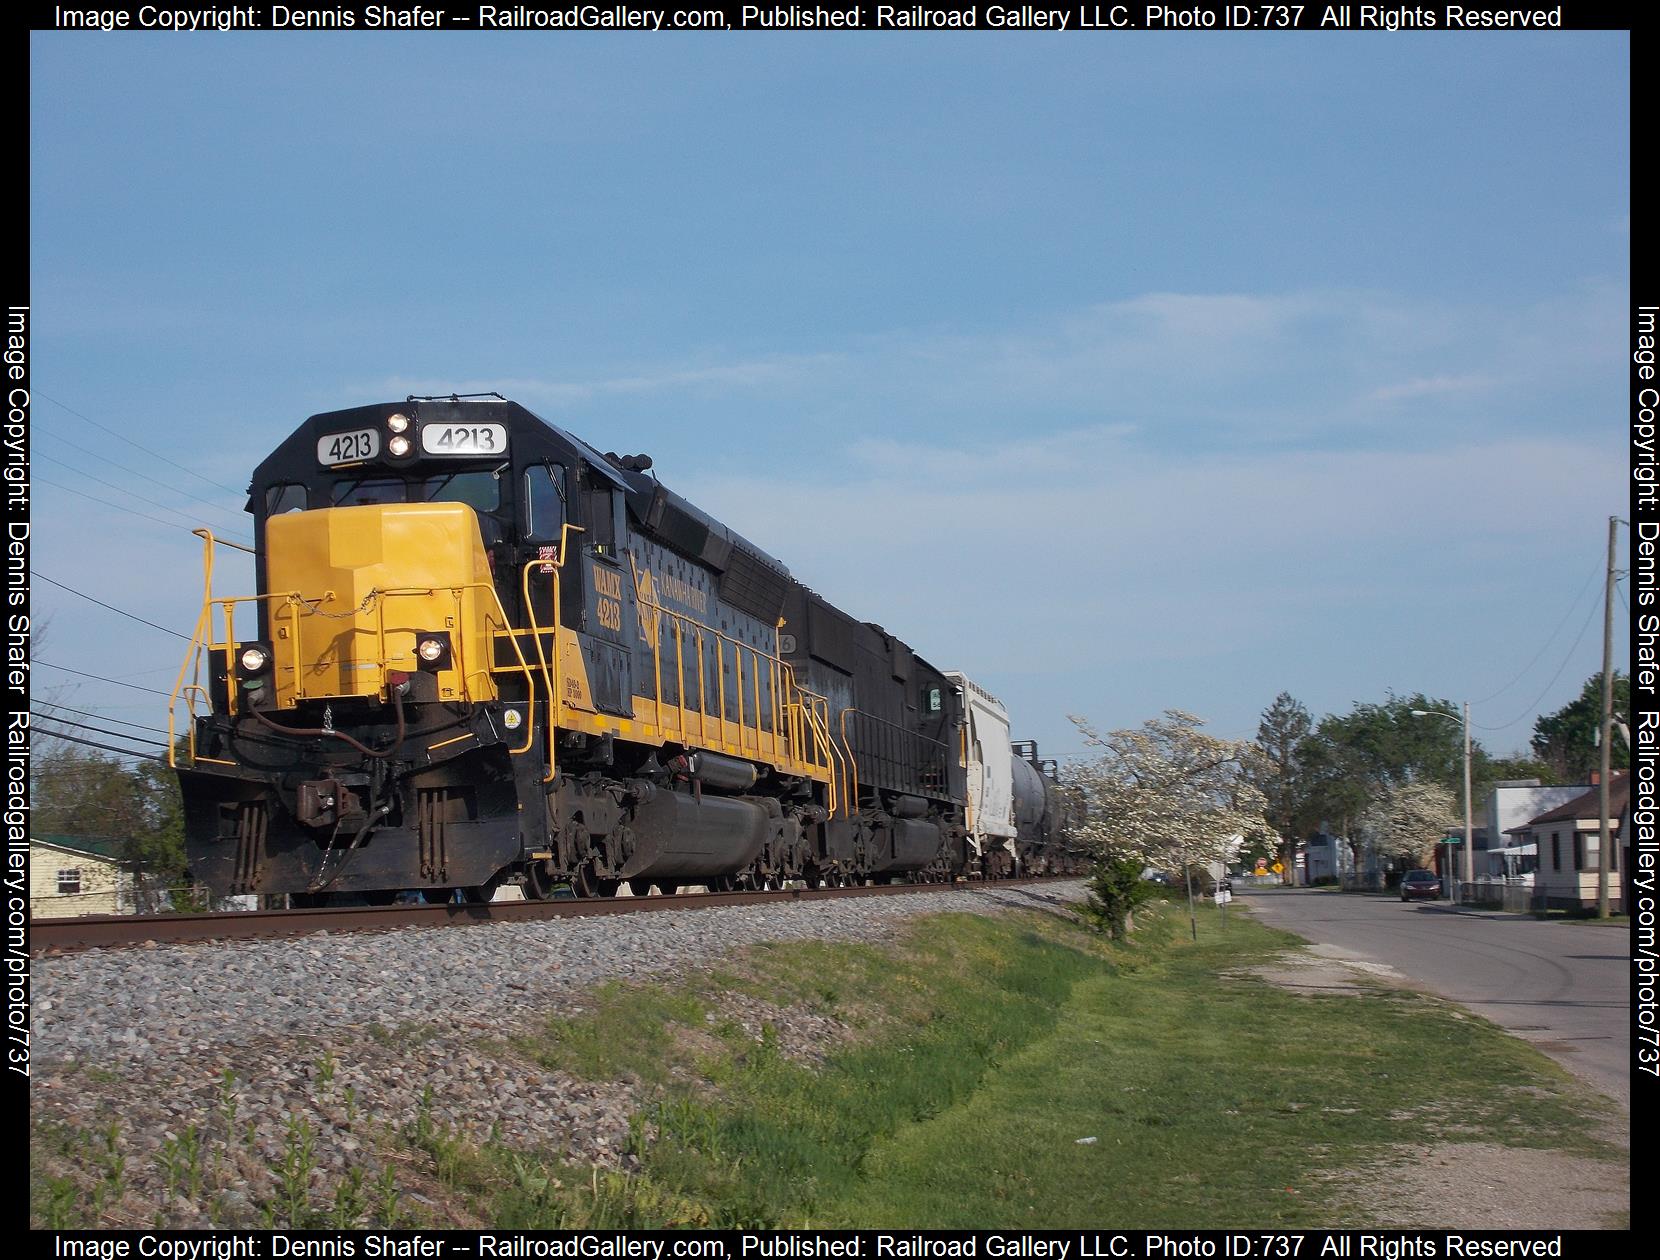 WAMX 4213 is a class SD40M-2 and  is pictured in Dunbar, West Virginia, USA.  This was taken along the West Virginia Secondary on the Kanawha River Railroad. Photo Copyright: Dennis Shafer uploaded to Railroad Gallery on 02/23/2023. This photograph of WAMX 4213 was taken on Thursday, April 18, 2019. All Rights Reserved. 